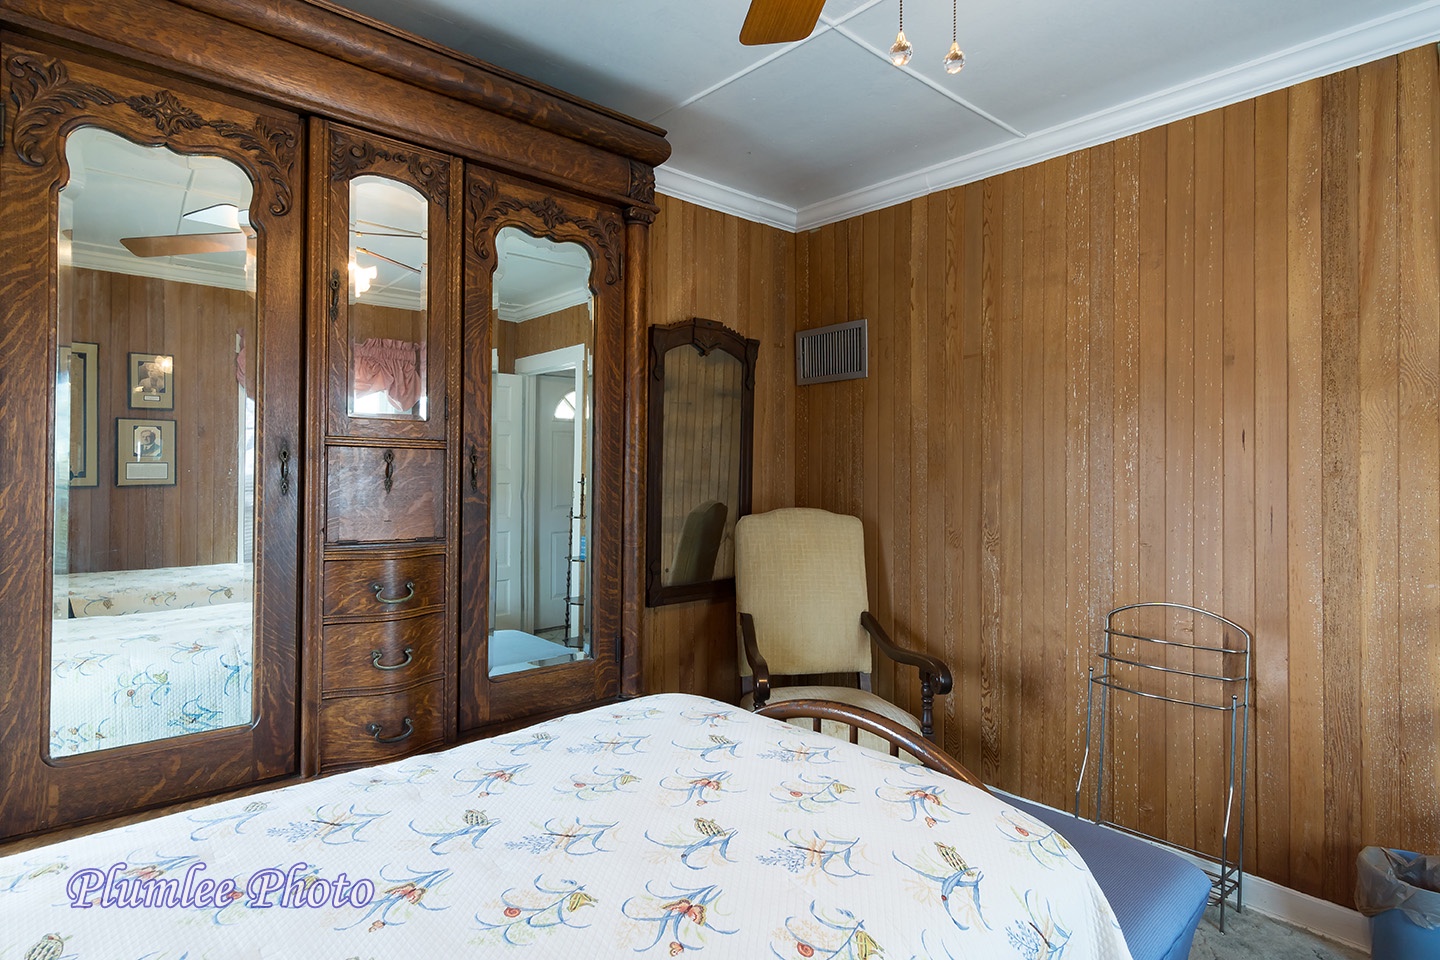 2nd Floor, Bedroom 3 has a large antique armoire.